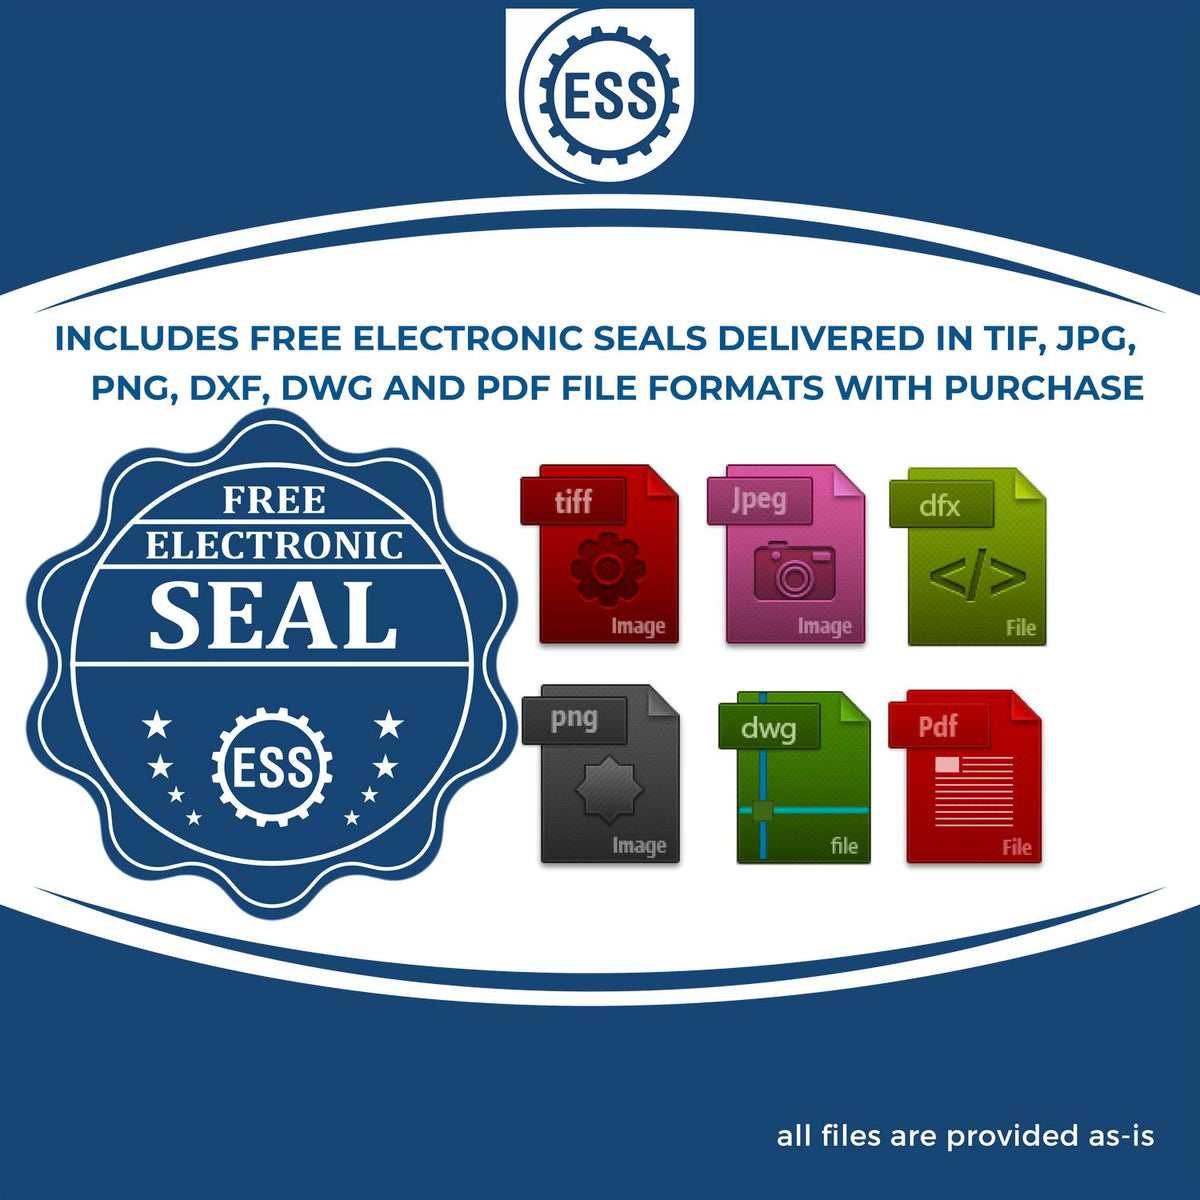 An infographic for the free electronic seal for the Heavy Duty Cast Iron West Virginia Architect Embosser illustrating the different file type icons such as DXF, DWG, TIF, JPG and PNG.